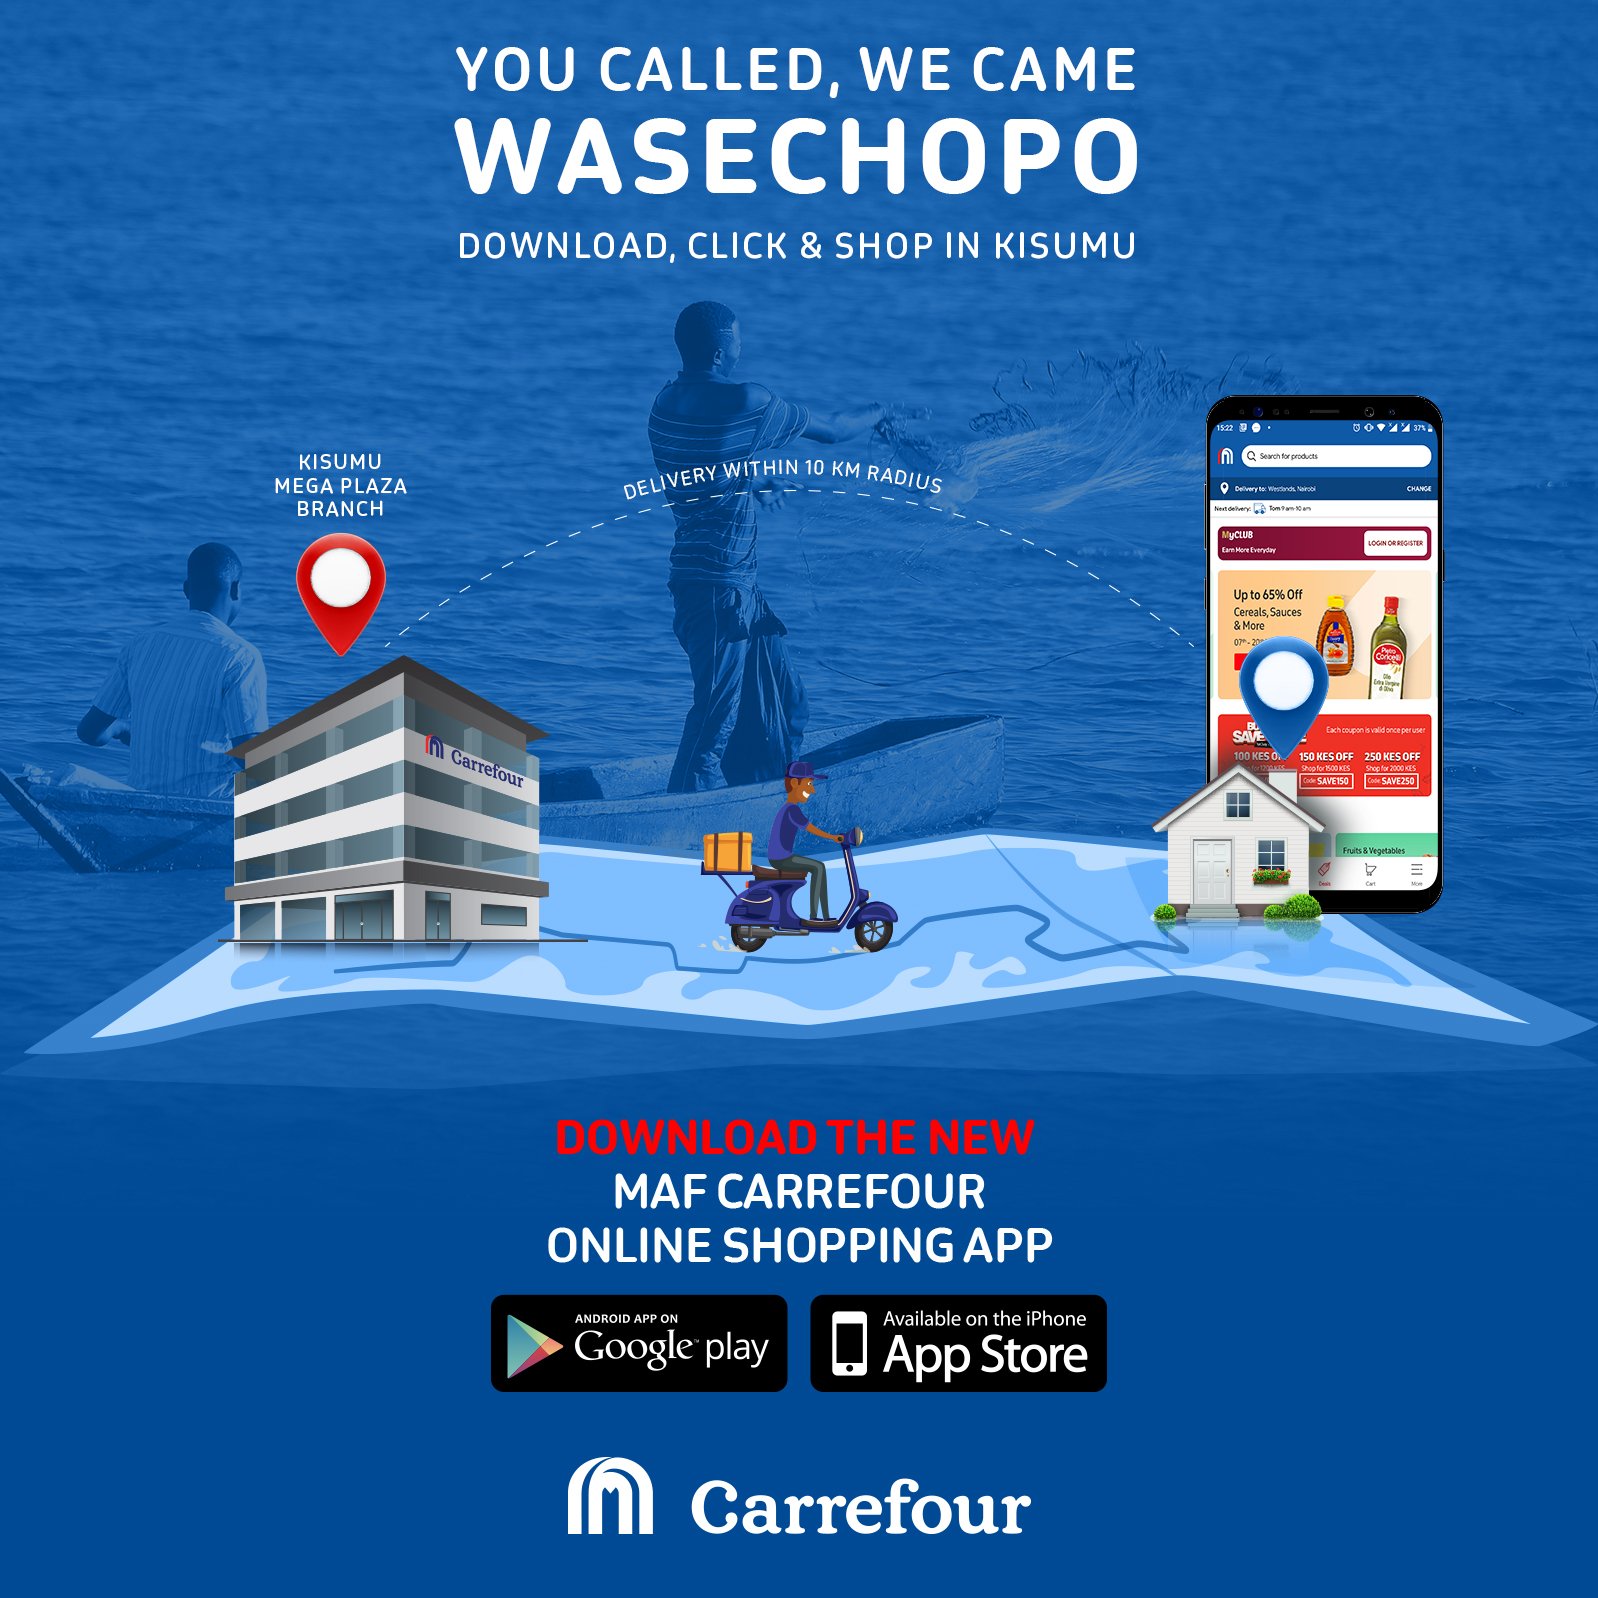 MAF Carrefour Online Shopping - Apps on Google Play